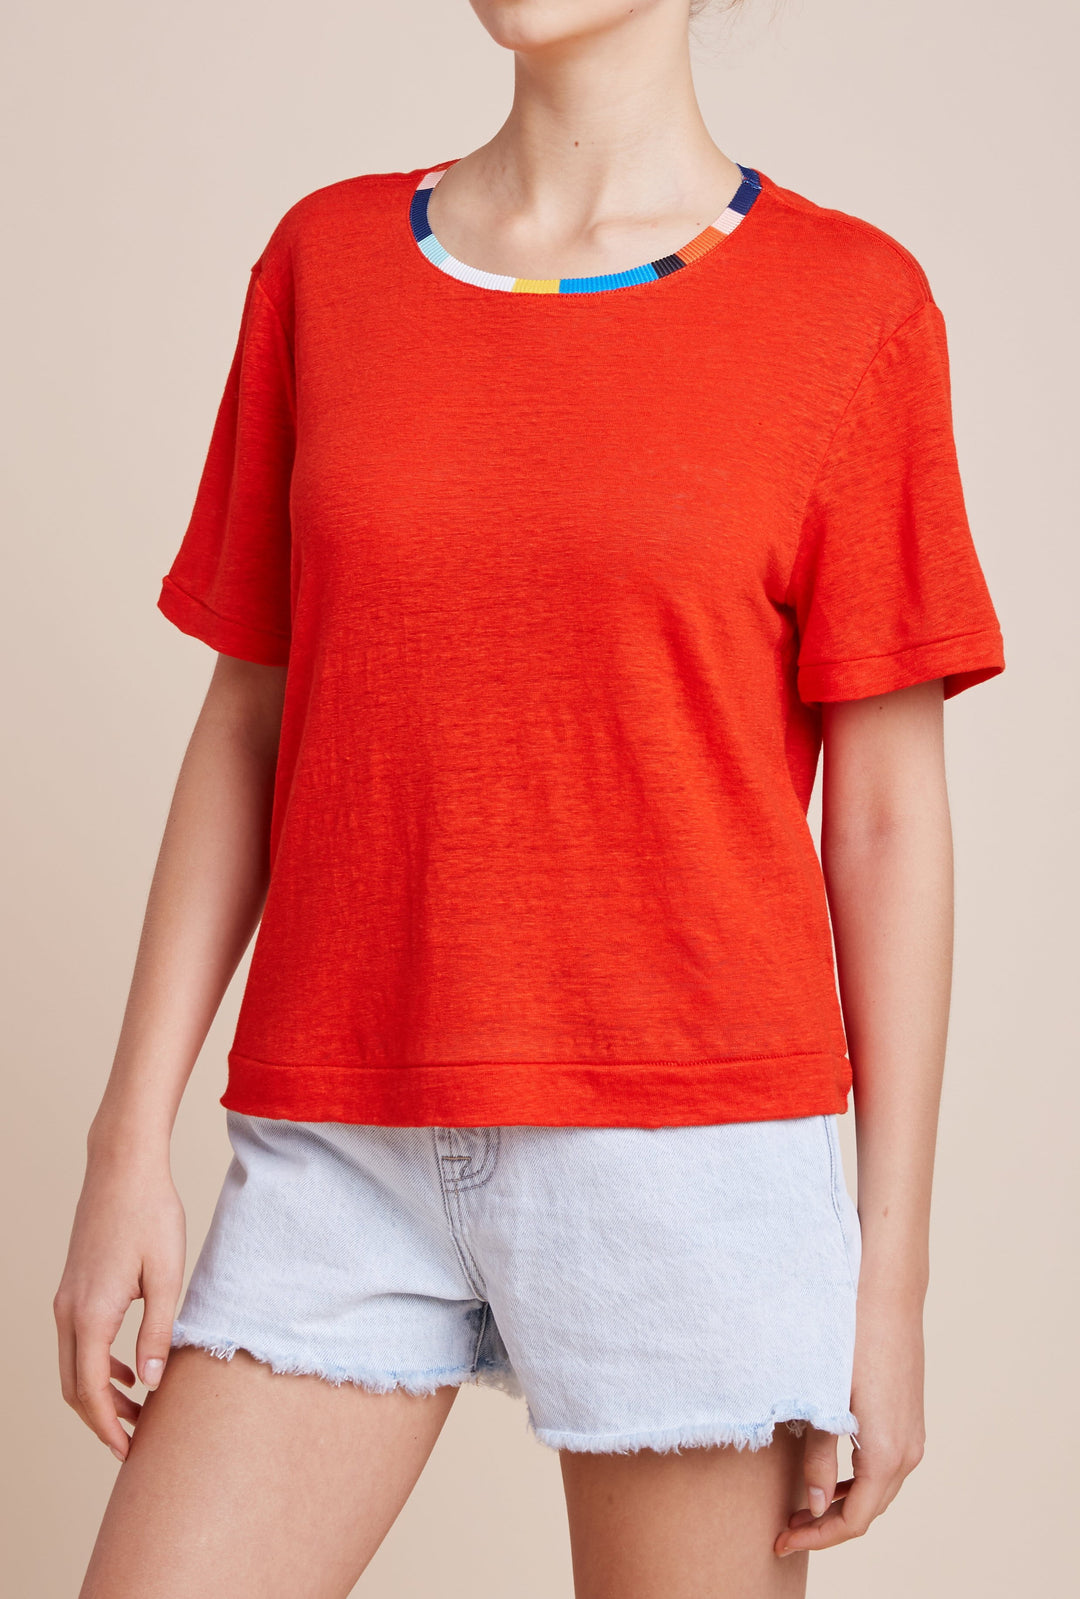 Splendid - Ciao Bella Tee in Amore Red